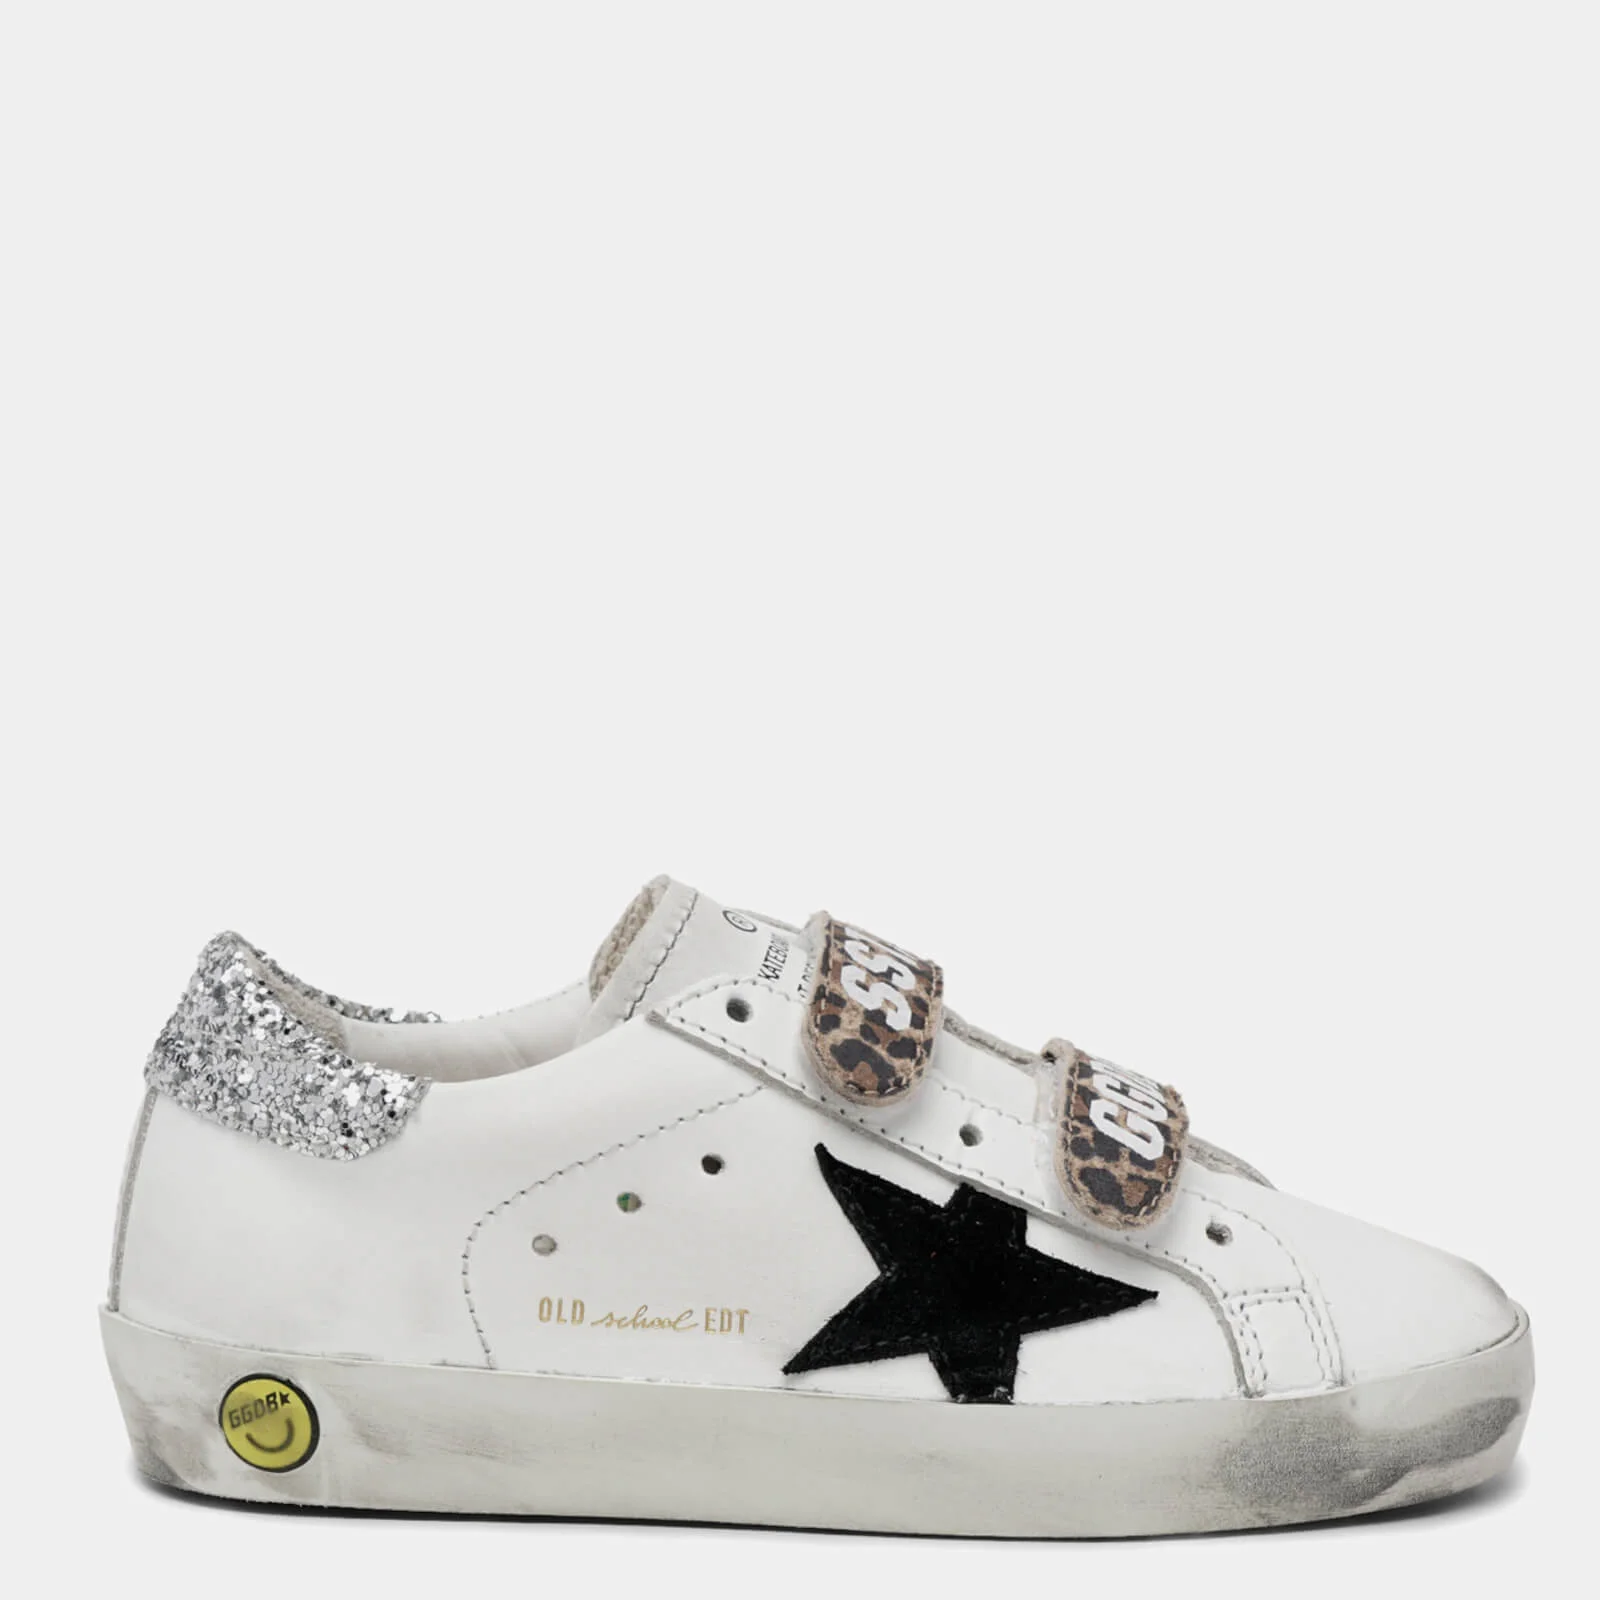 Golden Goose Toddlers' Old School Trainers - White/Black/Leopard Image 1